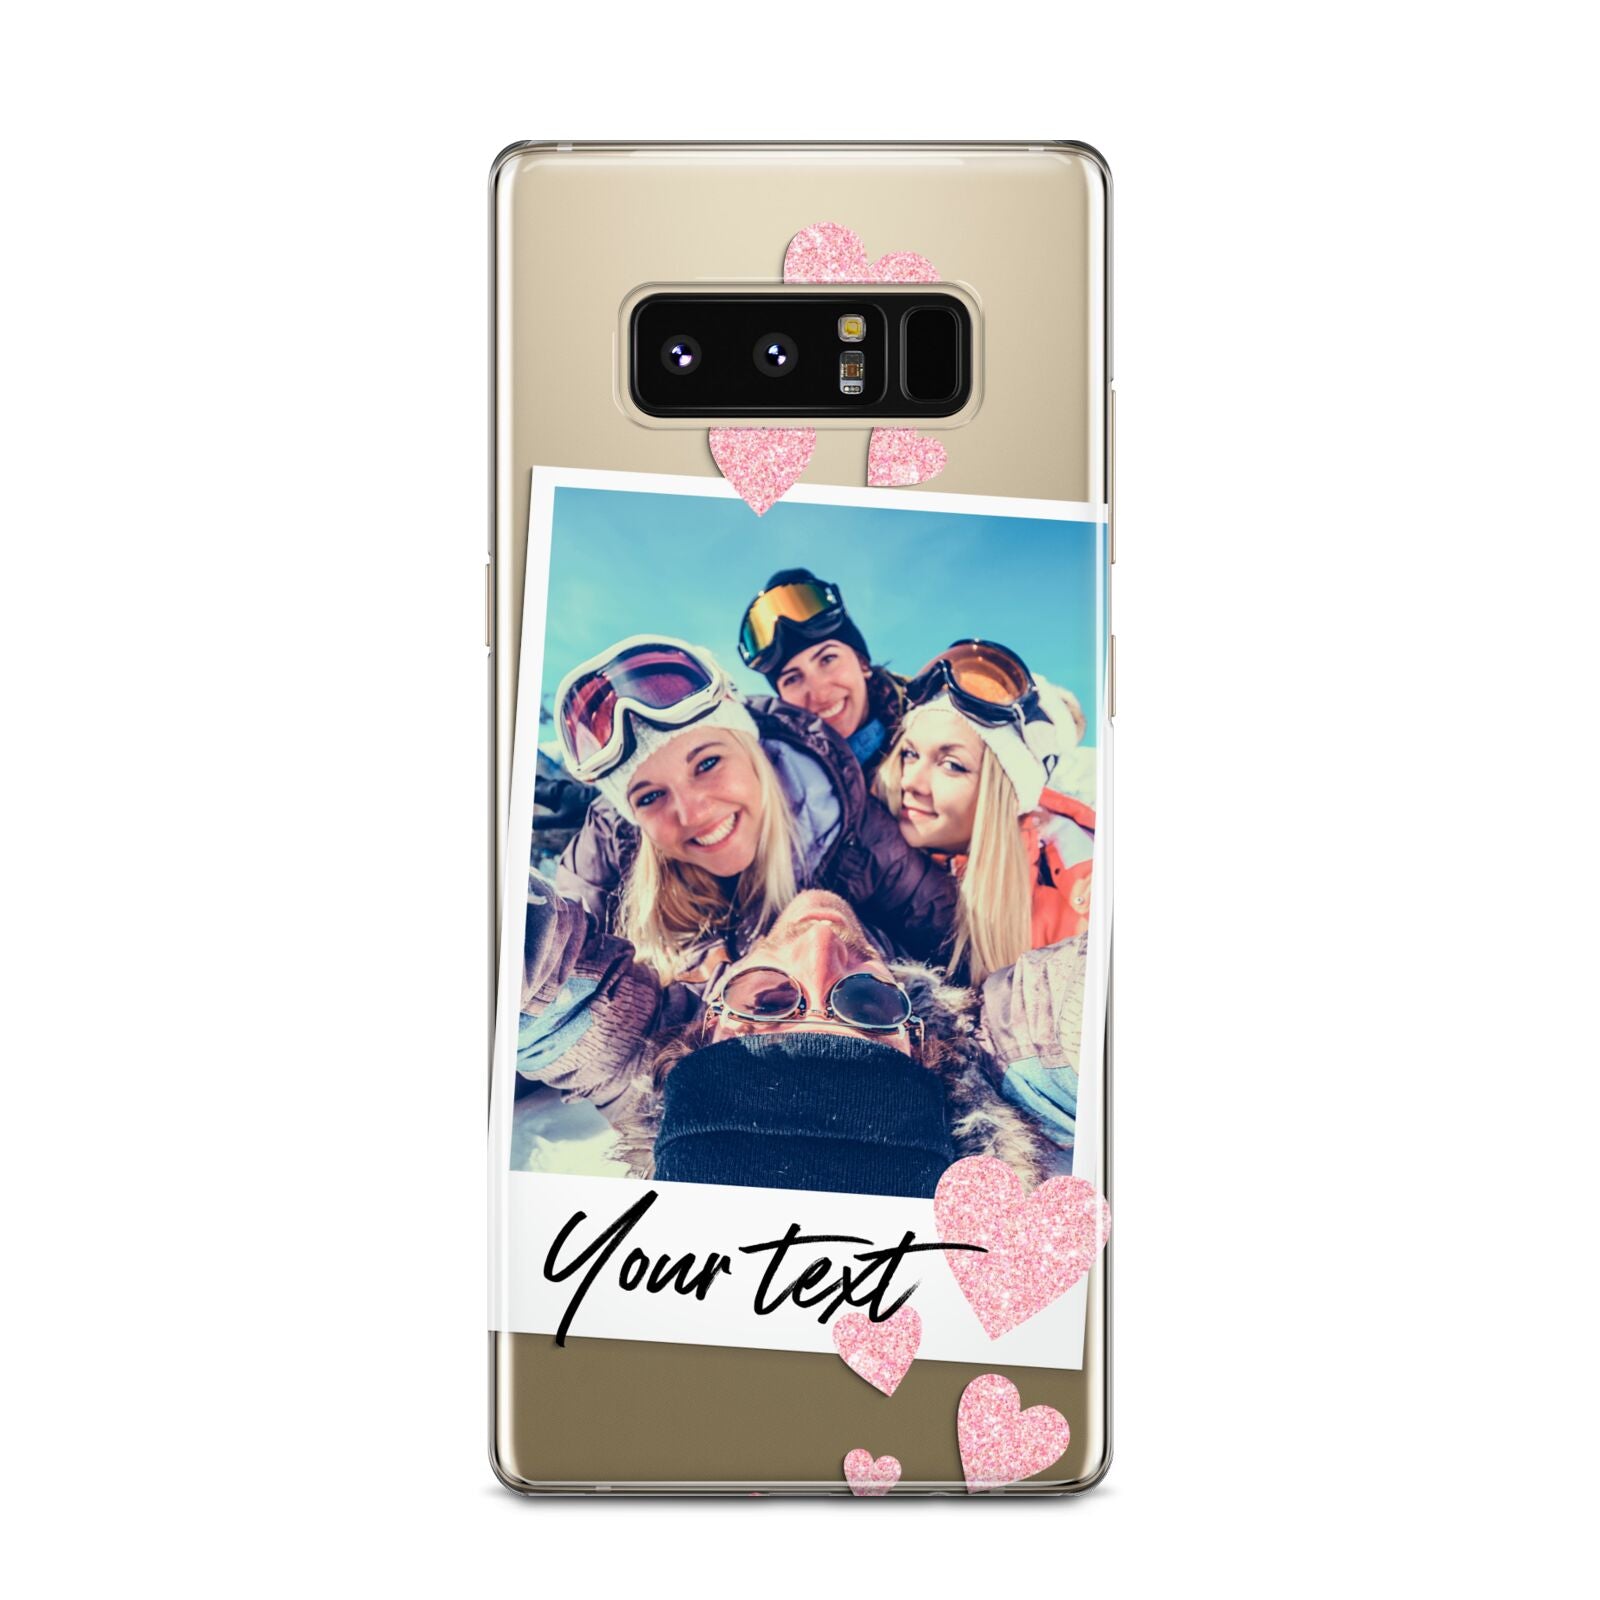 Photo with Text Samsung Galaxy Note 8 Case